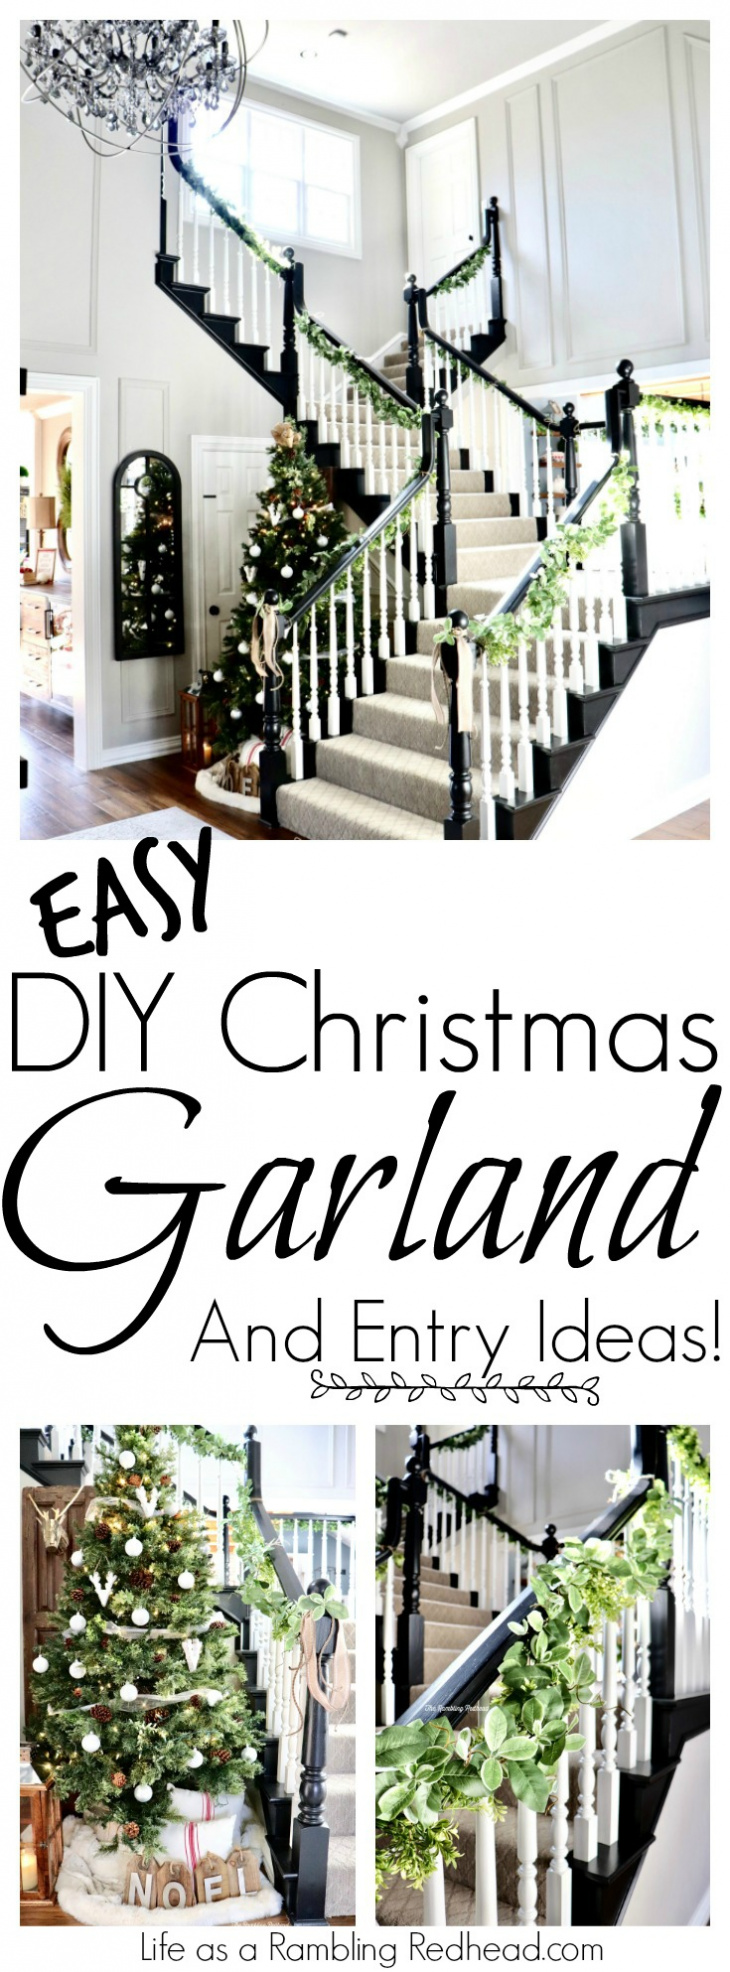 GORGEOUS DIY Christmas Garland and Entry decorating Ideas! So many Pictures! (Life as a Rambling Redhead)